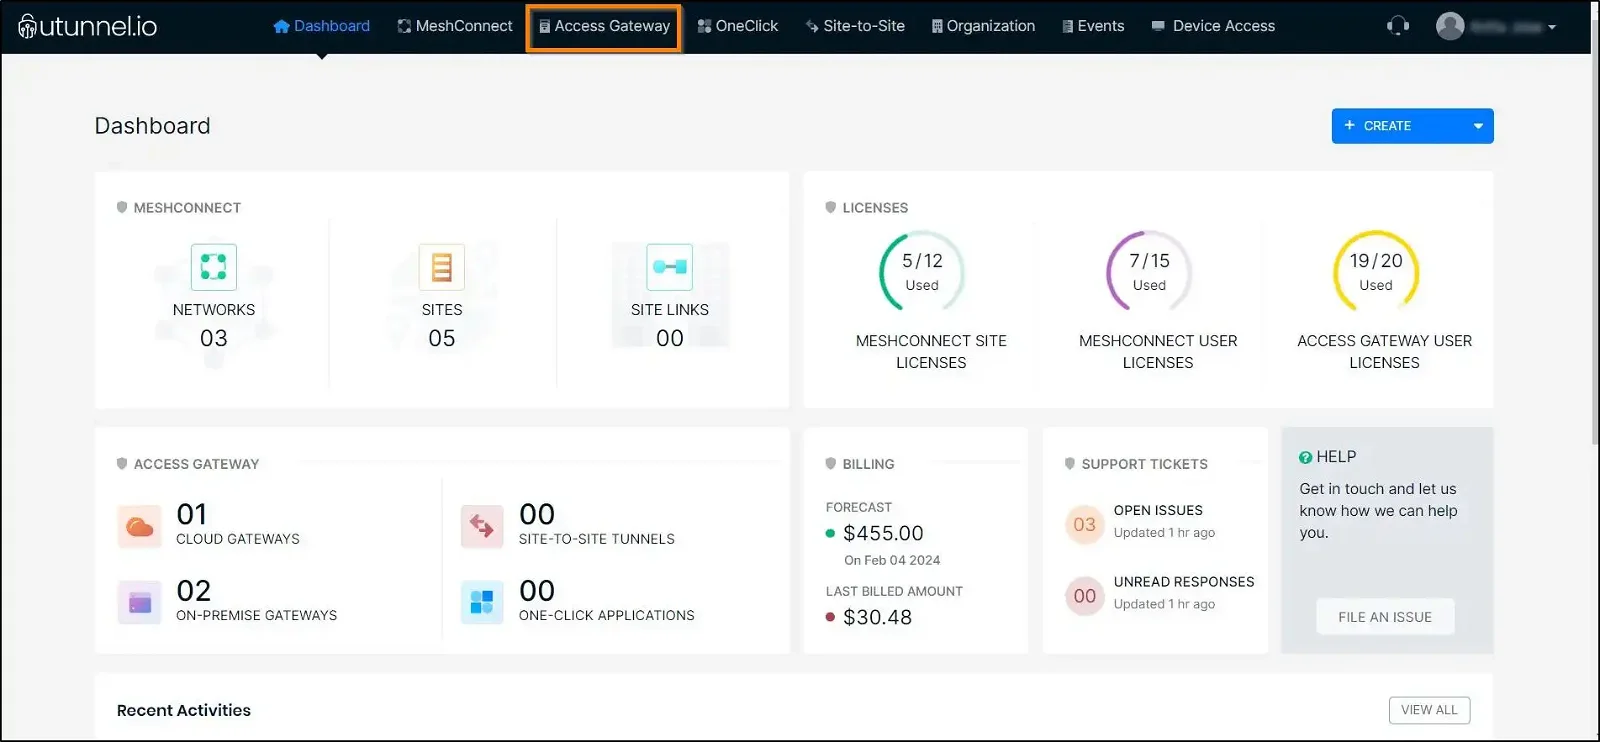 How to redeploy on-premise VPN server dashboard